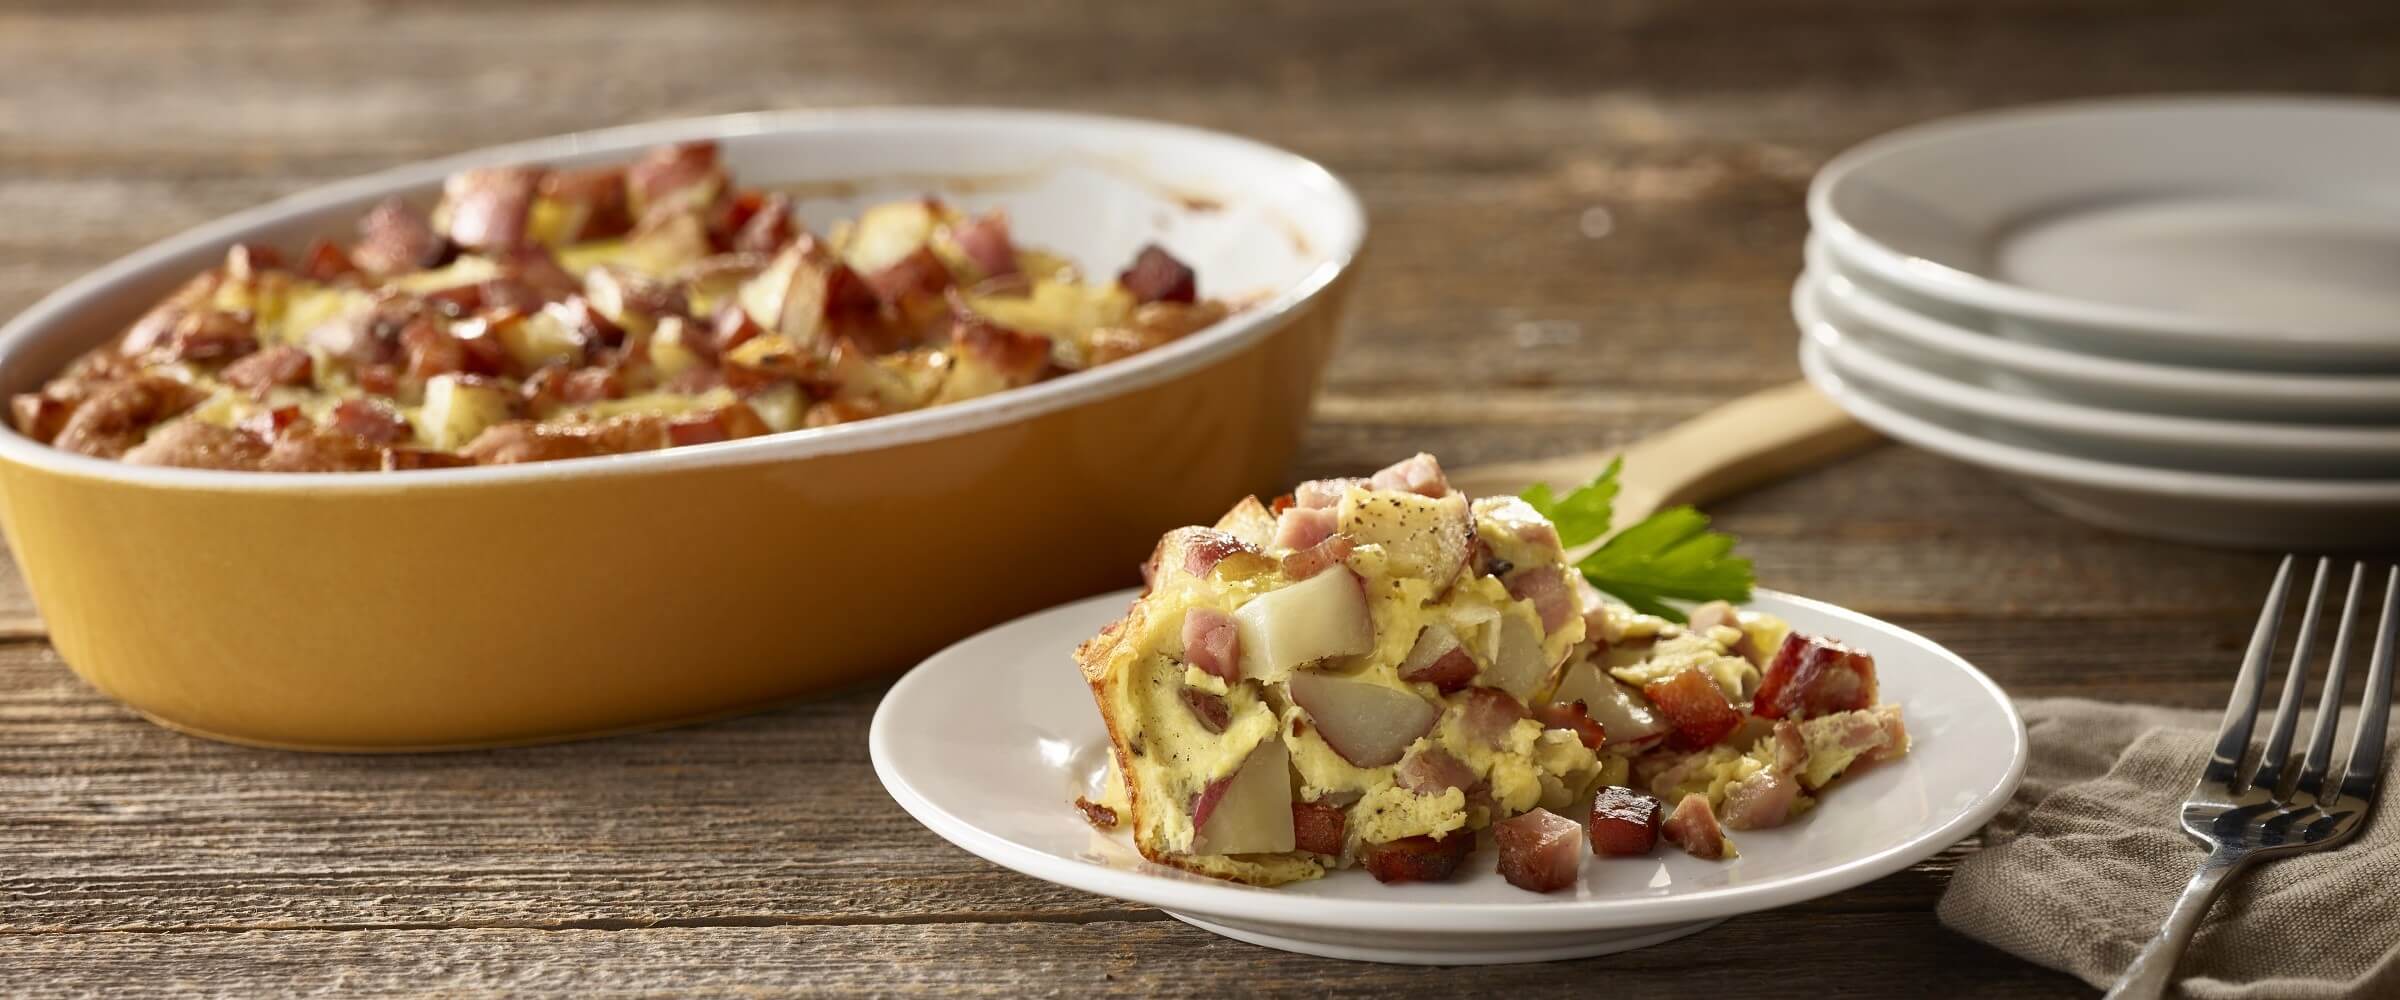 ham potato breakfast bake in dish with serving plate